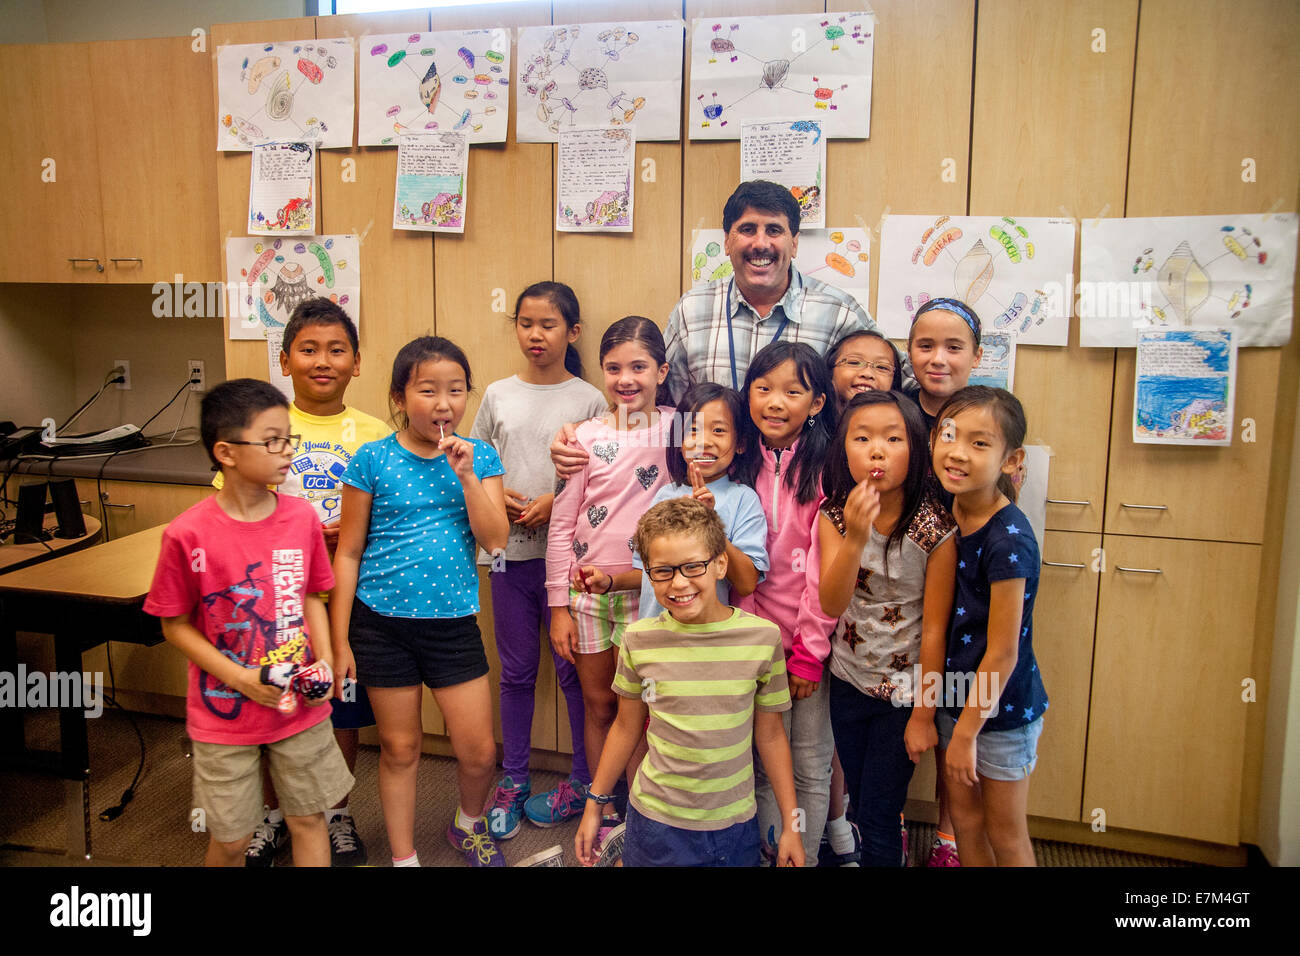 Asian, Hispanic and Caucasian elementary school students pose with their teacher at a summer writing workshop in Irvine, CA. Note yellow T shirts and drawings on wall. Stock Photo